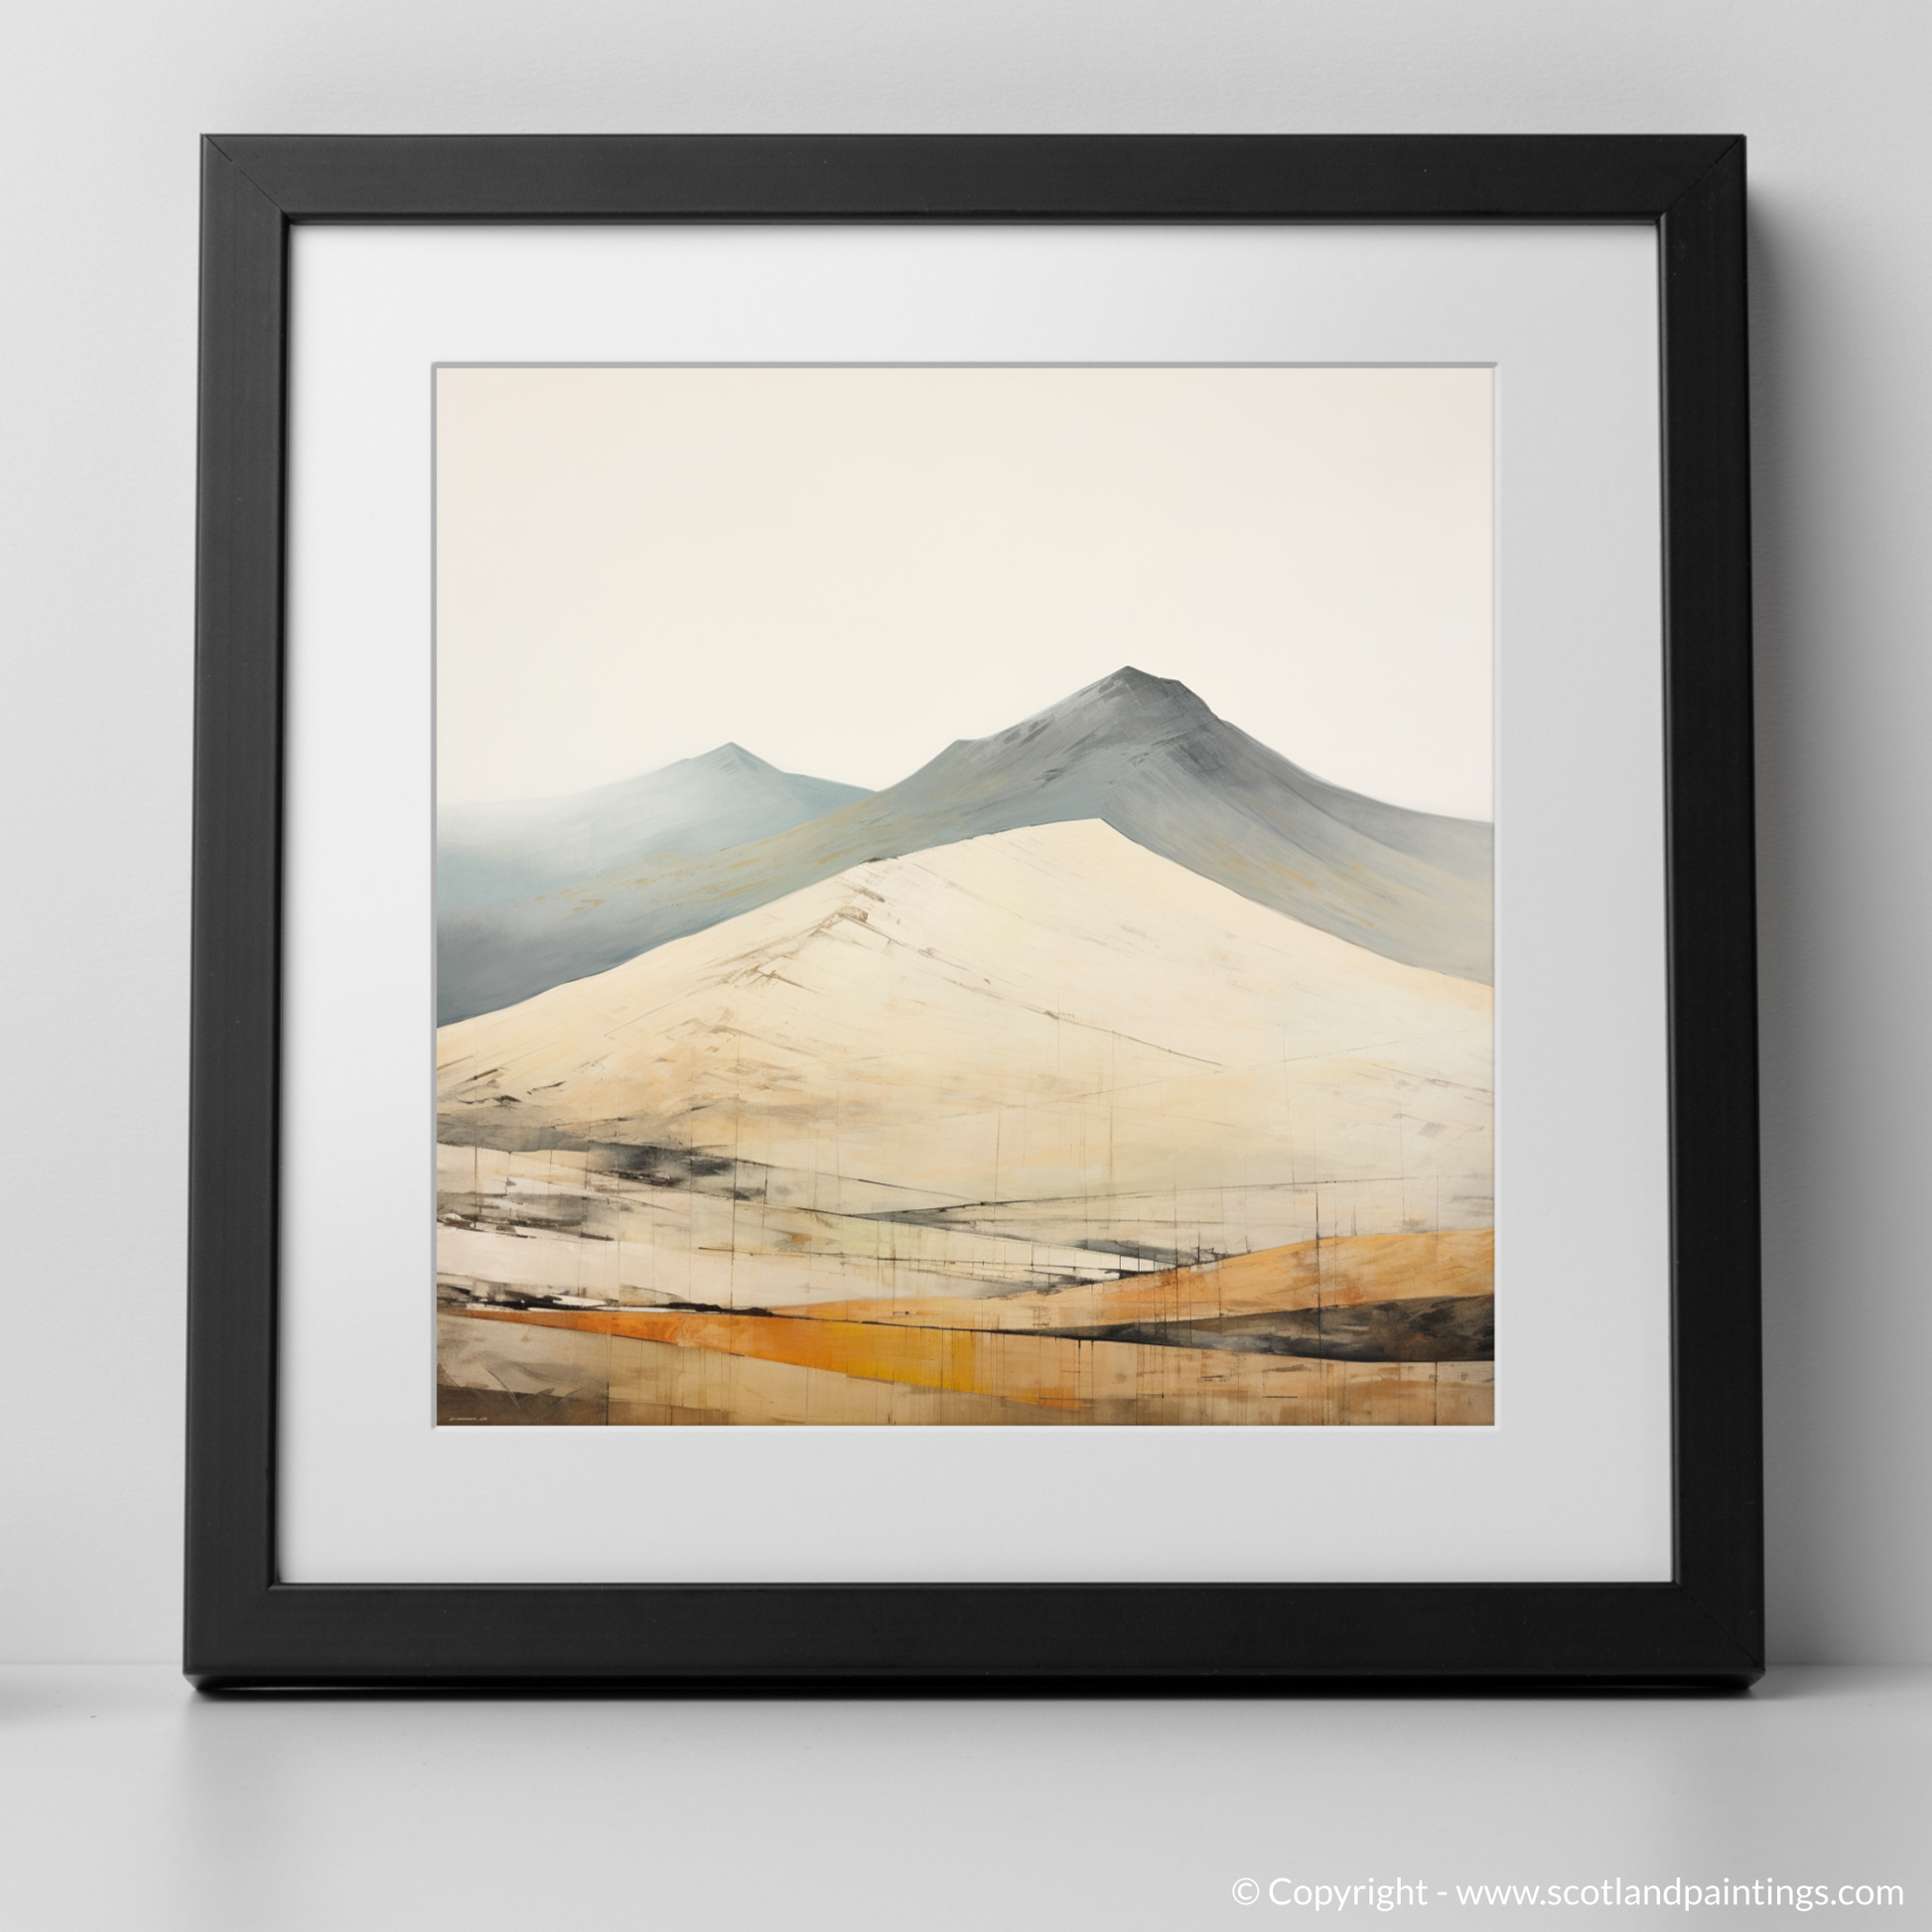 Art Print of Ben Lawers with a black frame